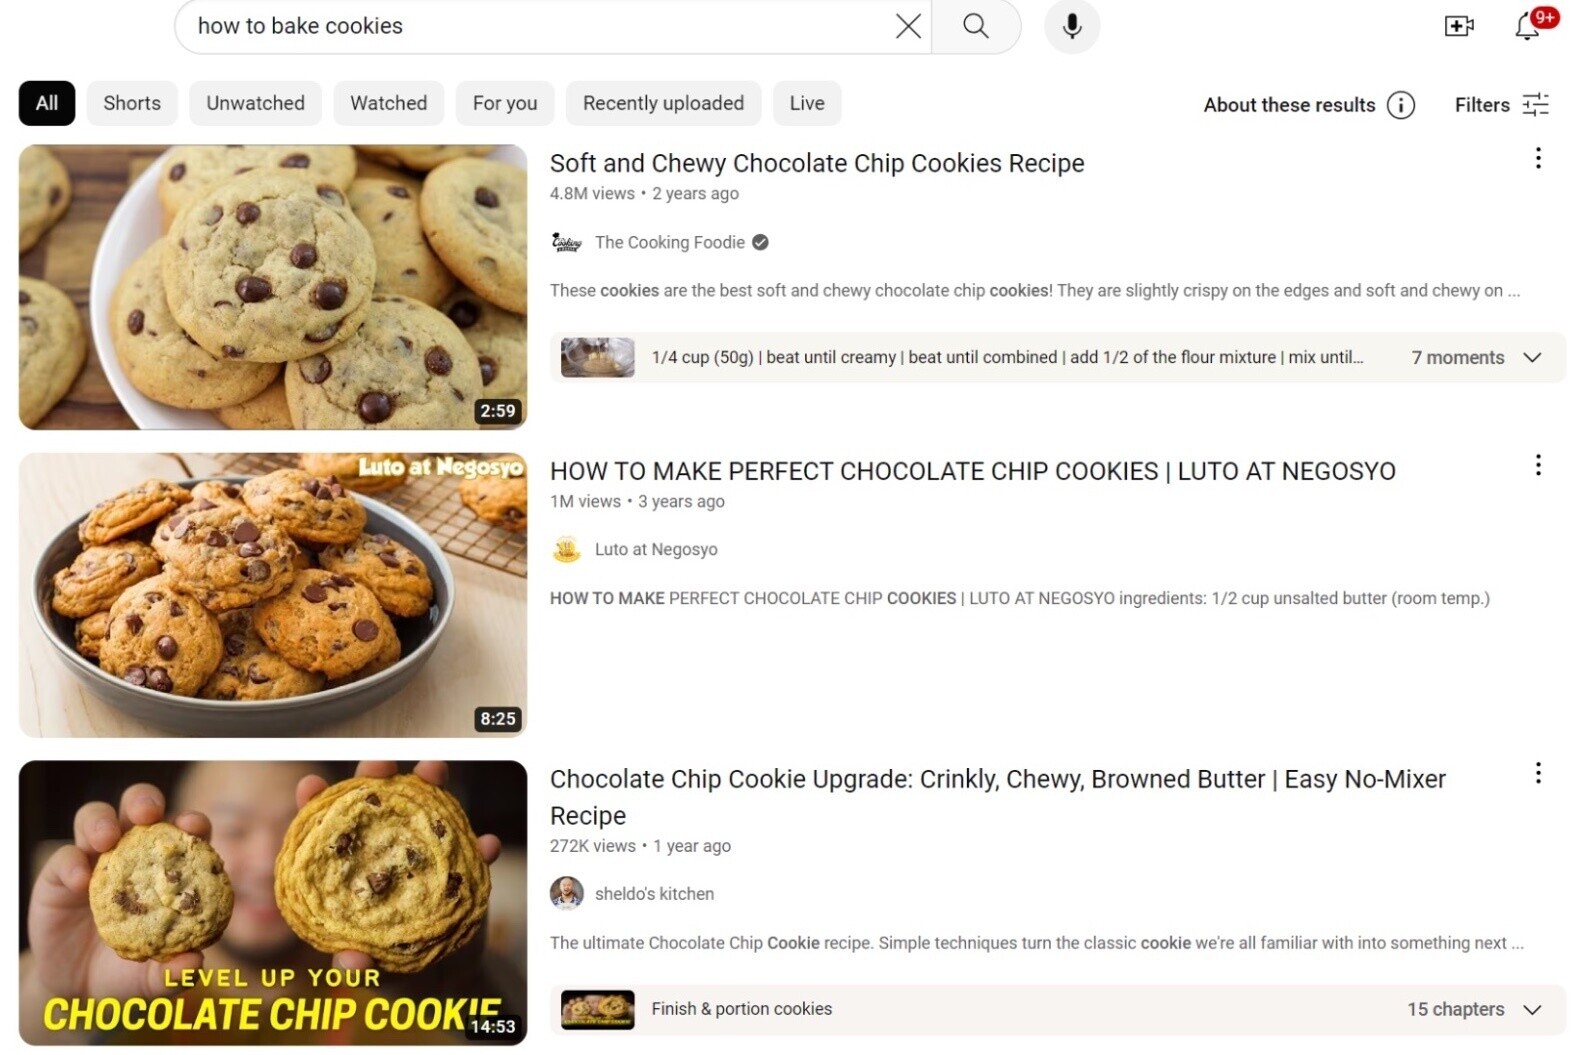 "how to bake cookies" videos on YouTube